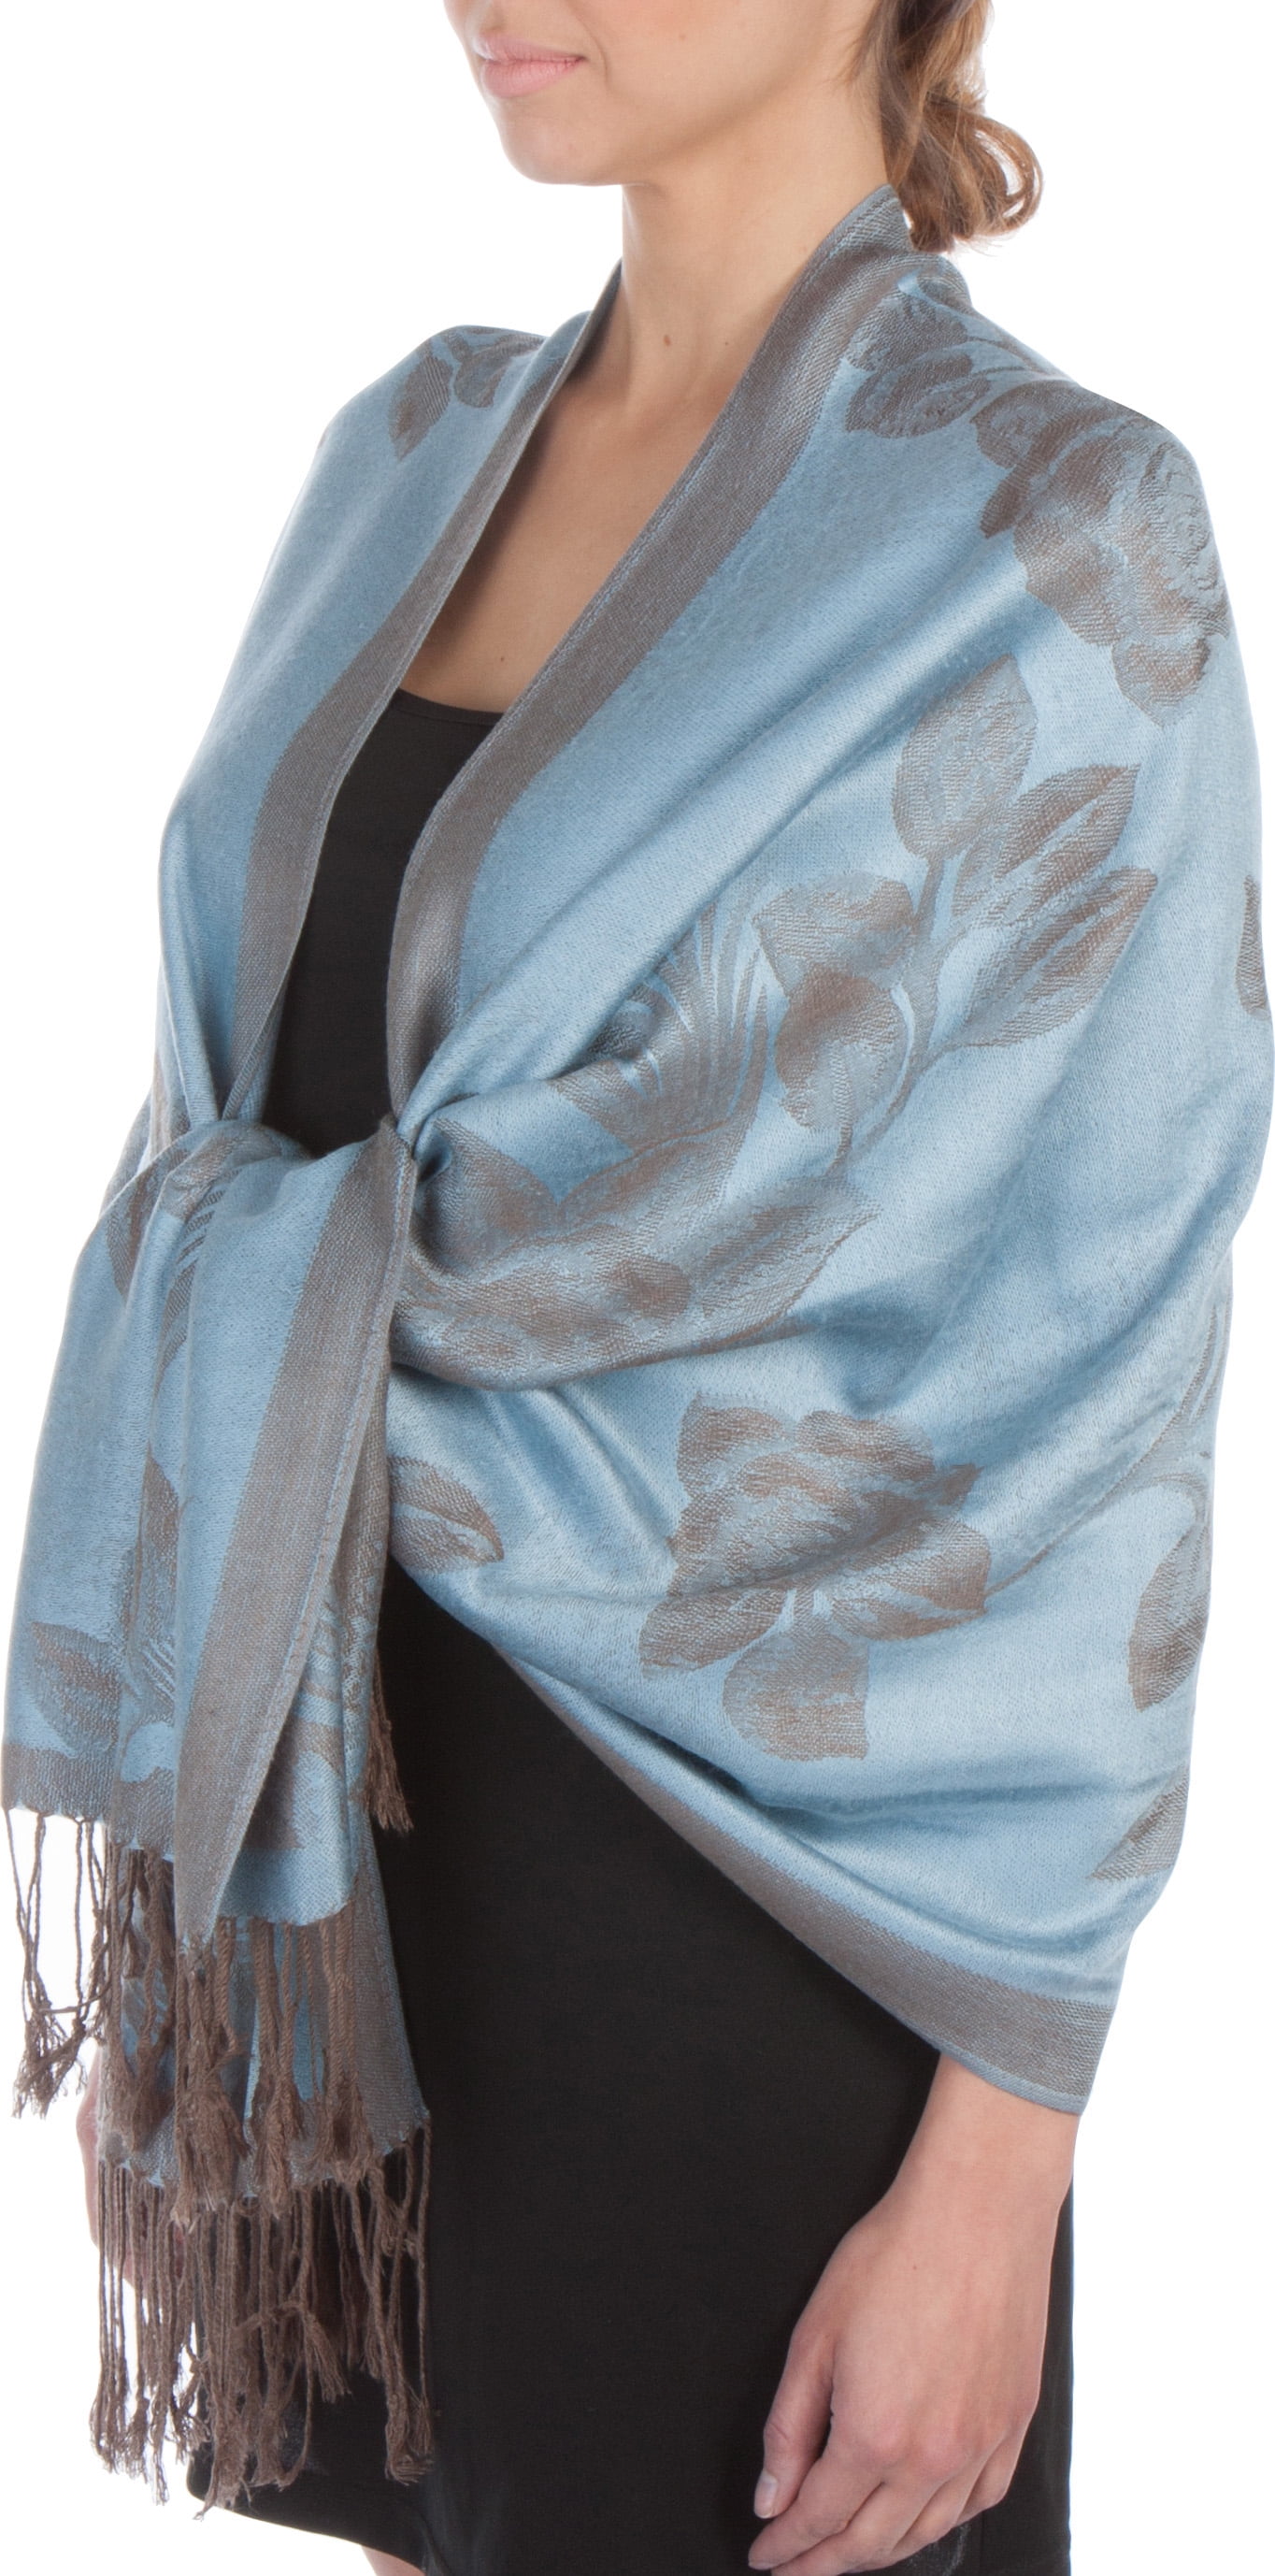 100% Pure Wool Woman's Pashmina Scarf Soft Wrap Stole rose prink in grey blue 